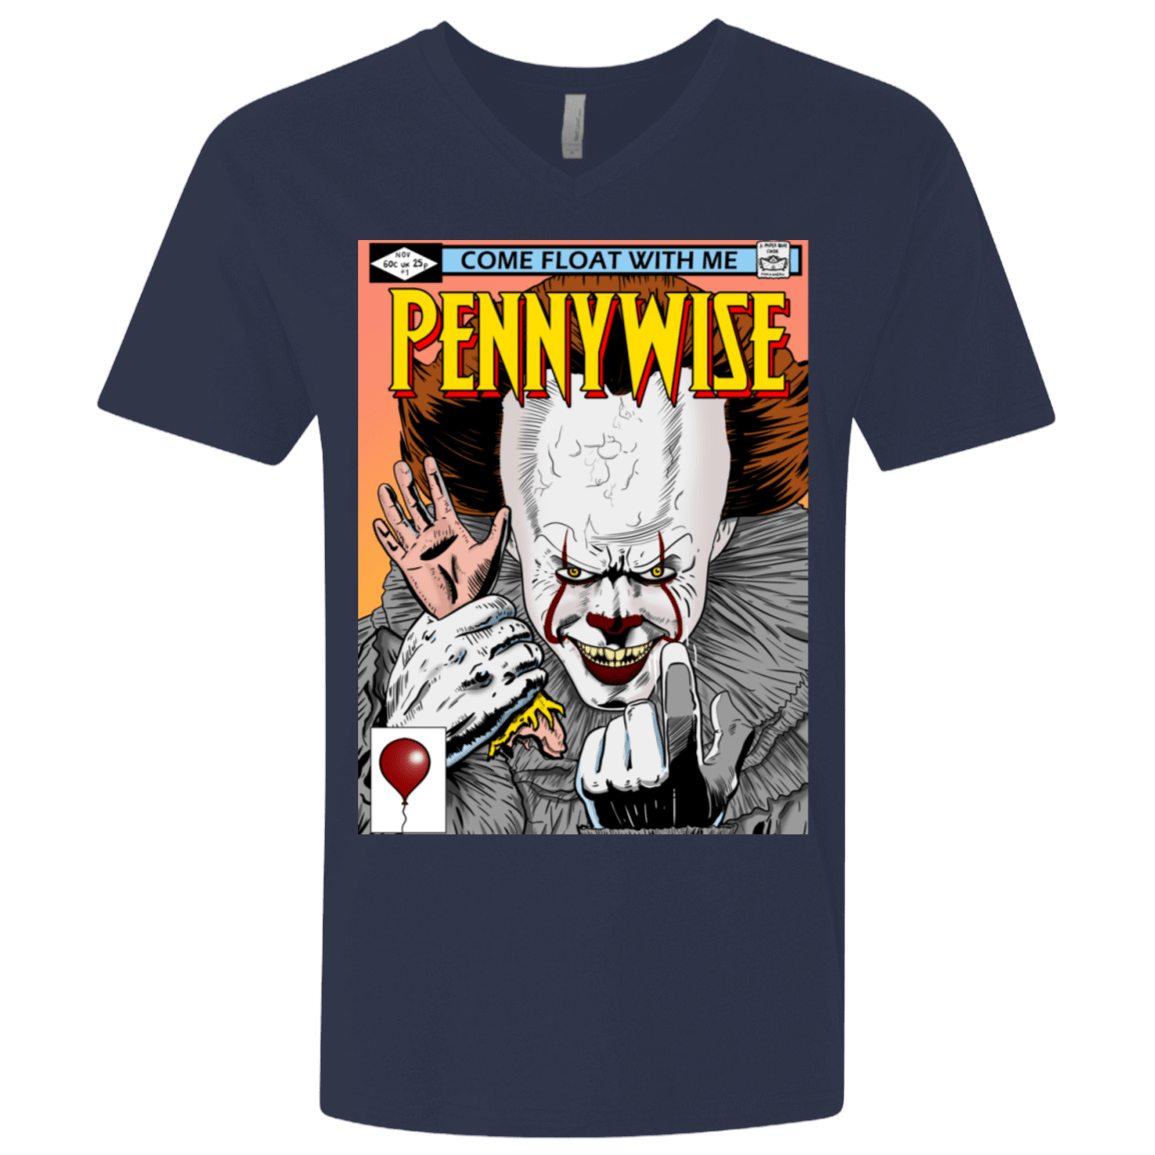 T-Shirts Midnight Navy / X-Small Pennywise 8+ Men's Premium V-Neck